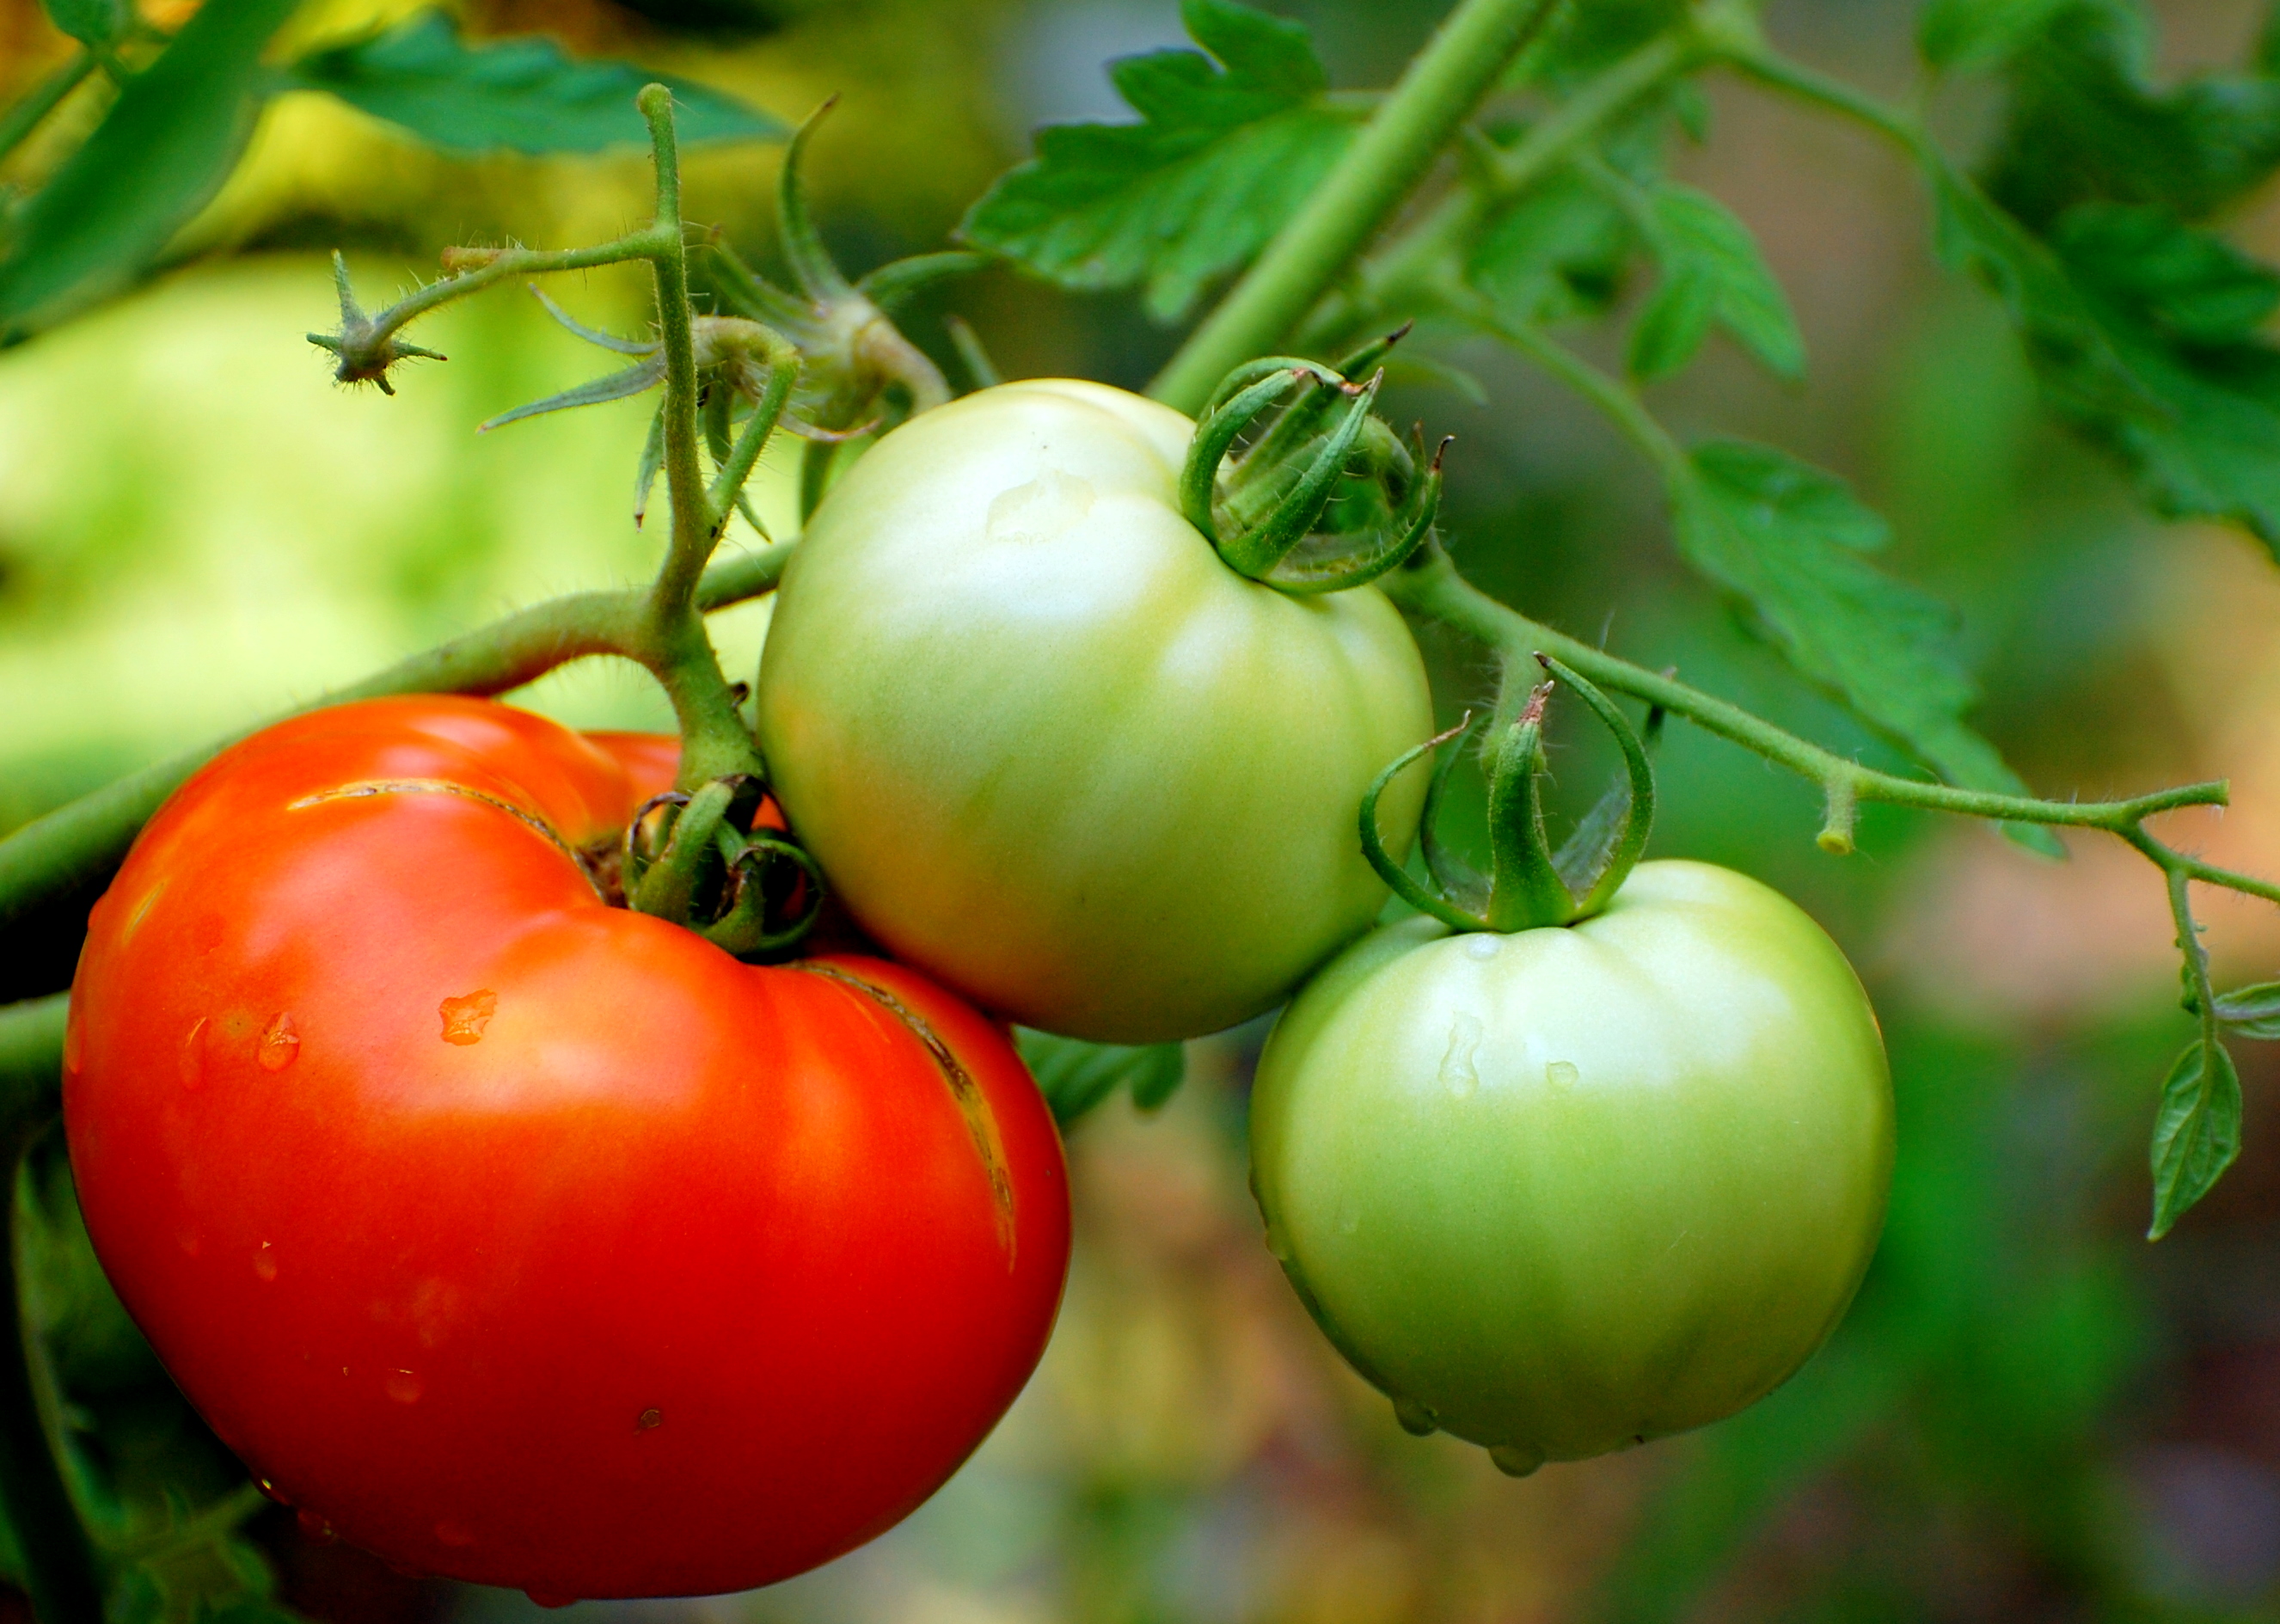 Tomatoes can be grown in October for good yields.